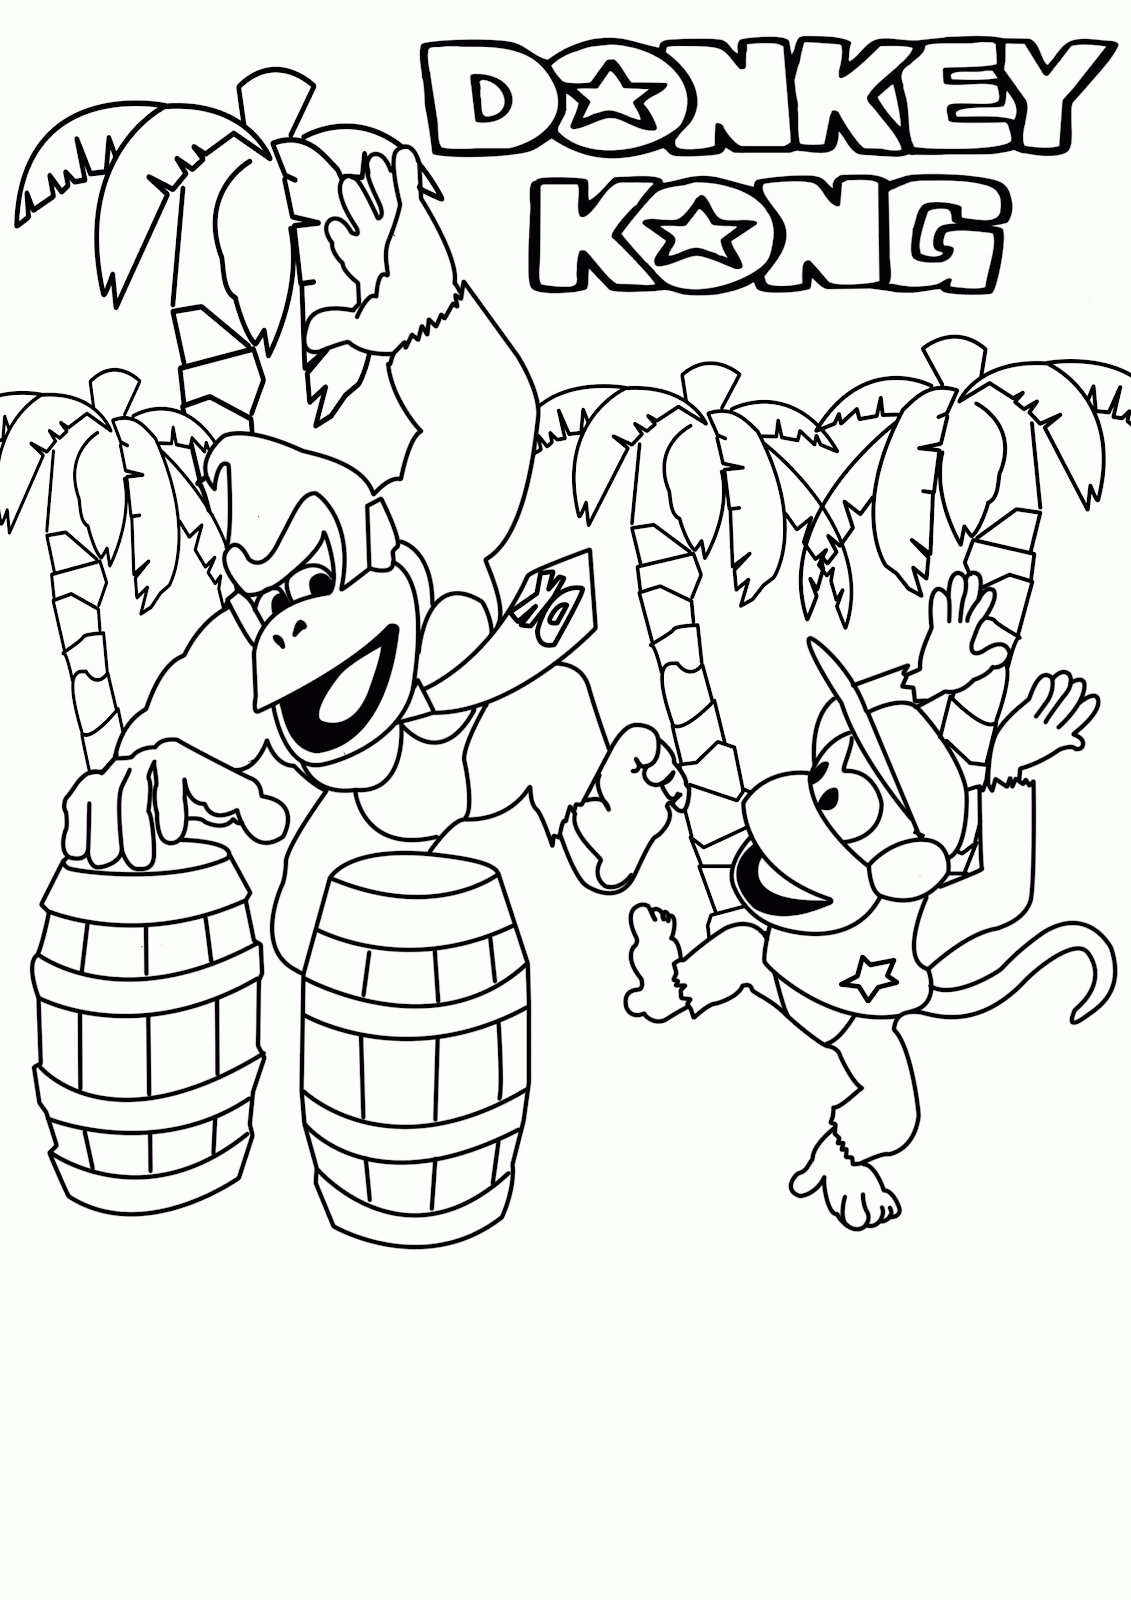 Fresh Donkey Kong Coloring Pages To Print Resume Format Download